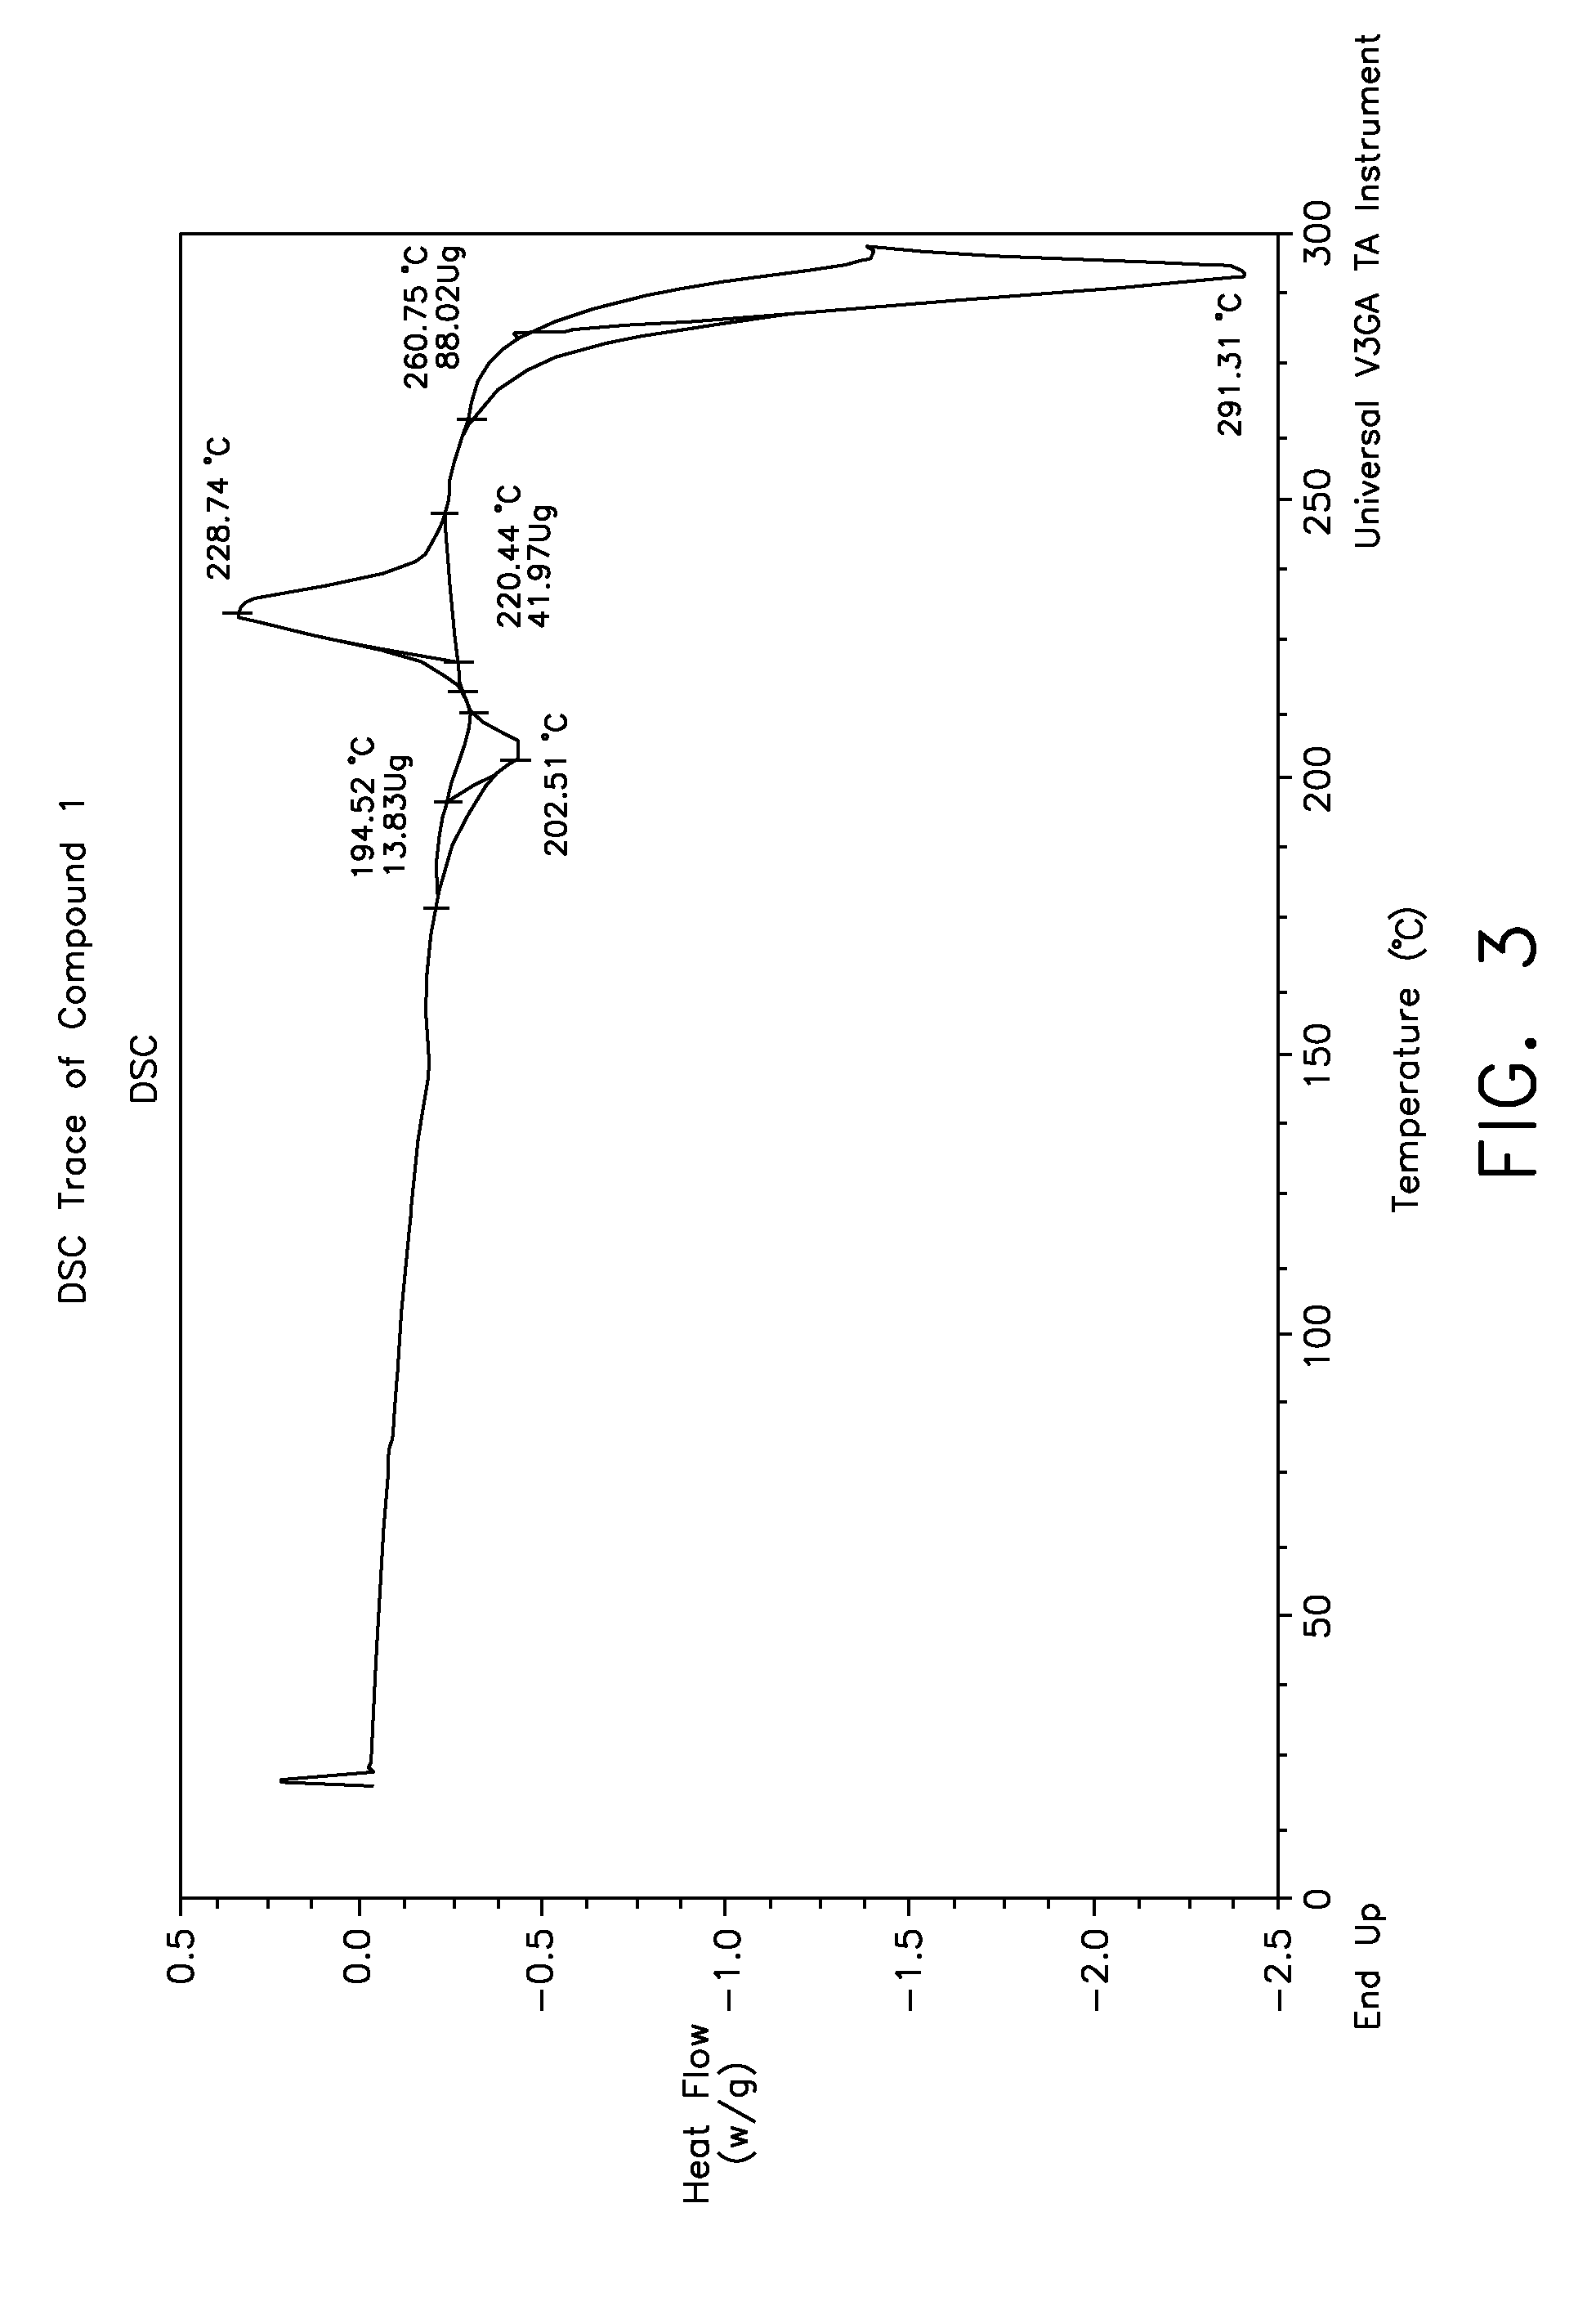 Compositions of n-[2,4-bis(1,1-dimethylethyl)-5-hydroxyphenyl]-1,4-dihydro-4-oxoquinoline-3-carboxamide